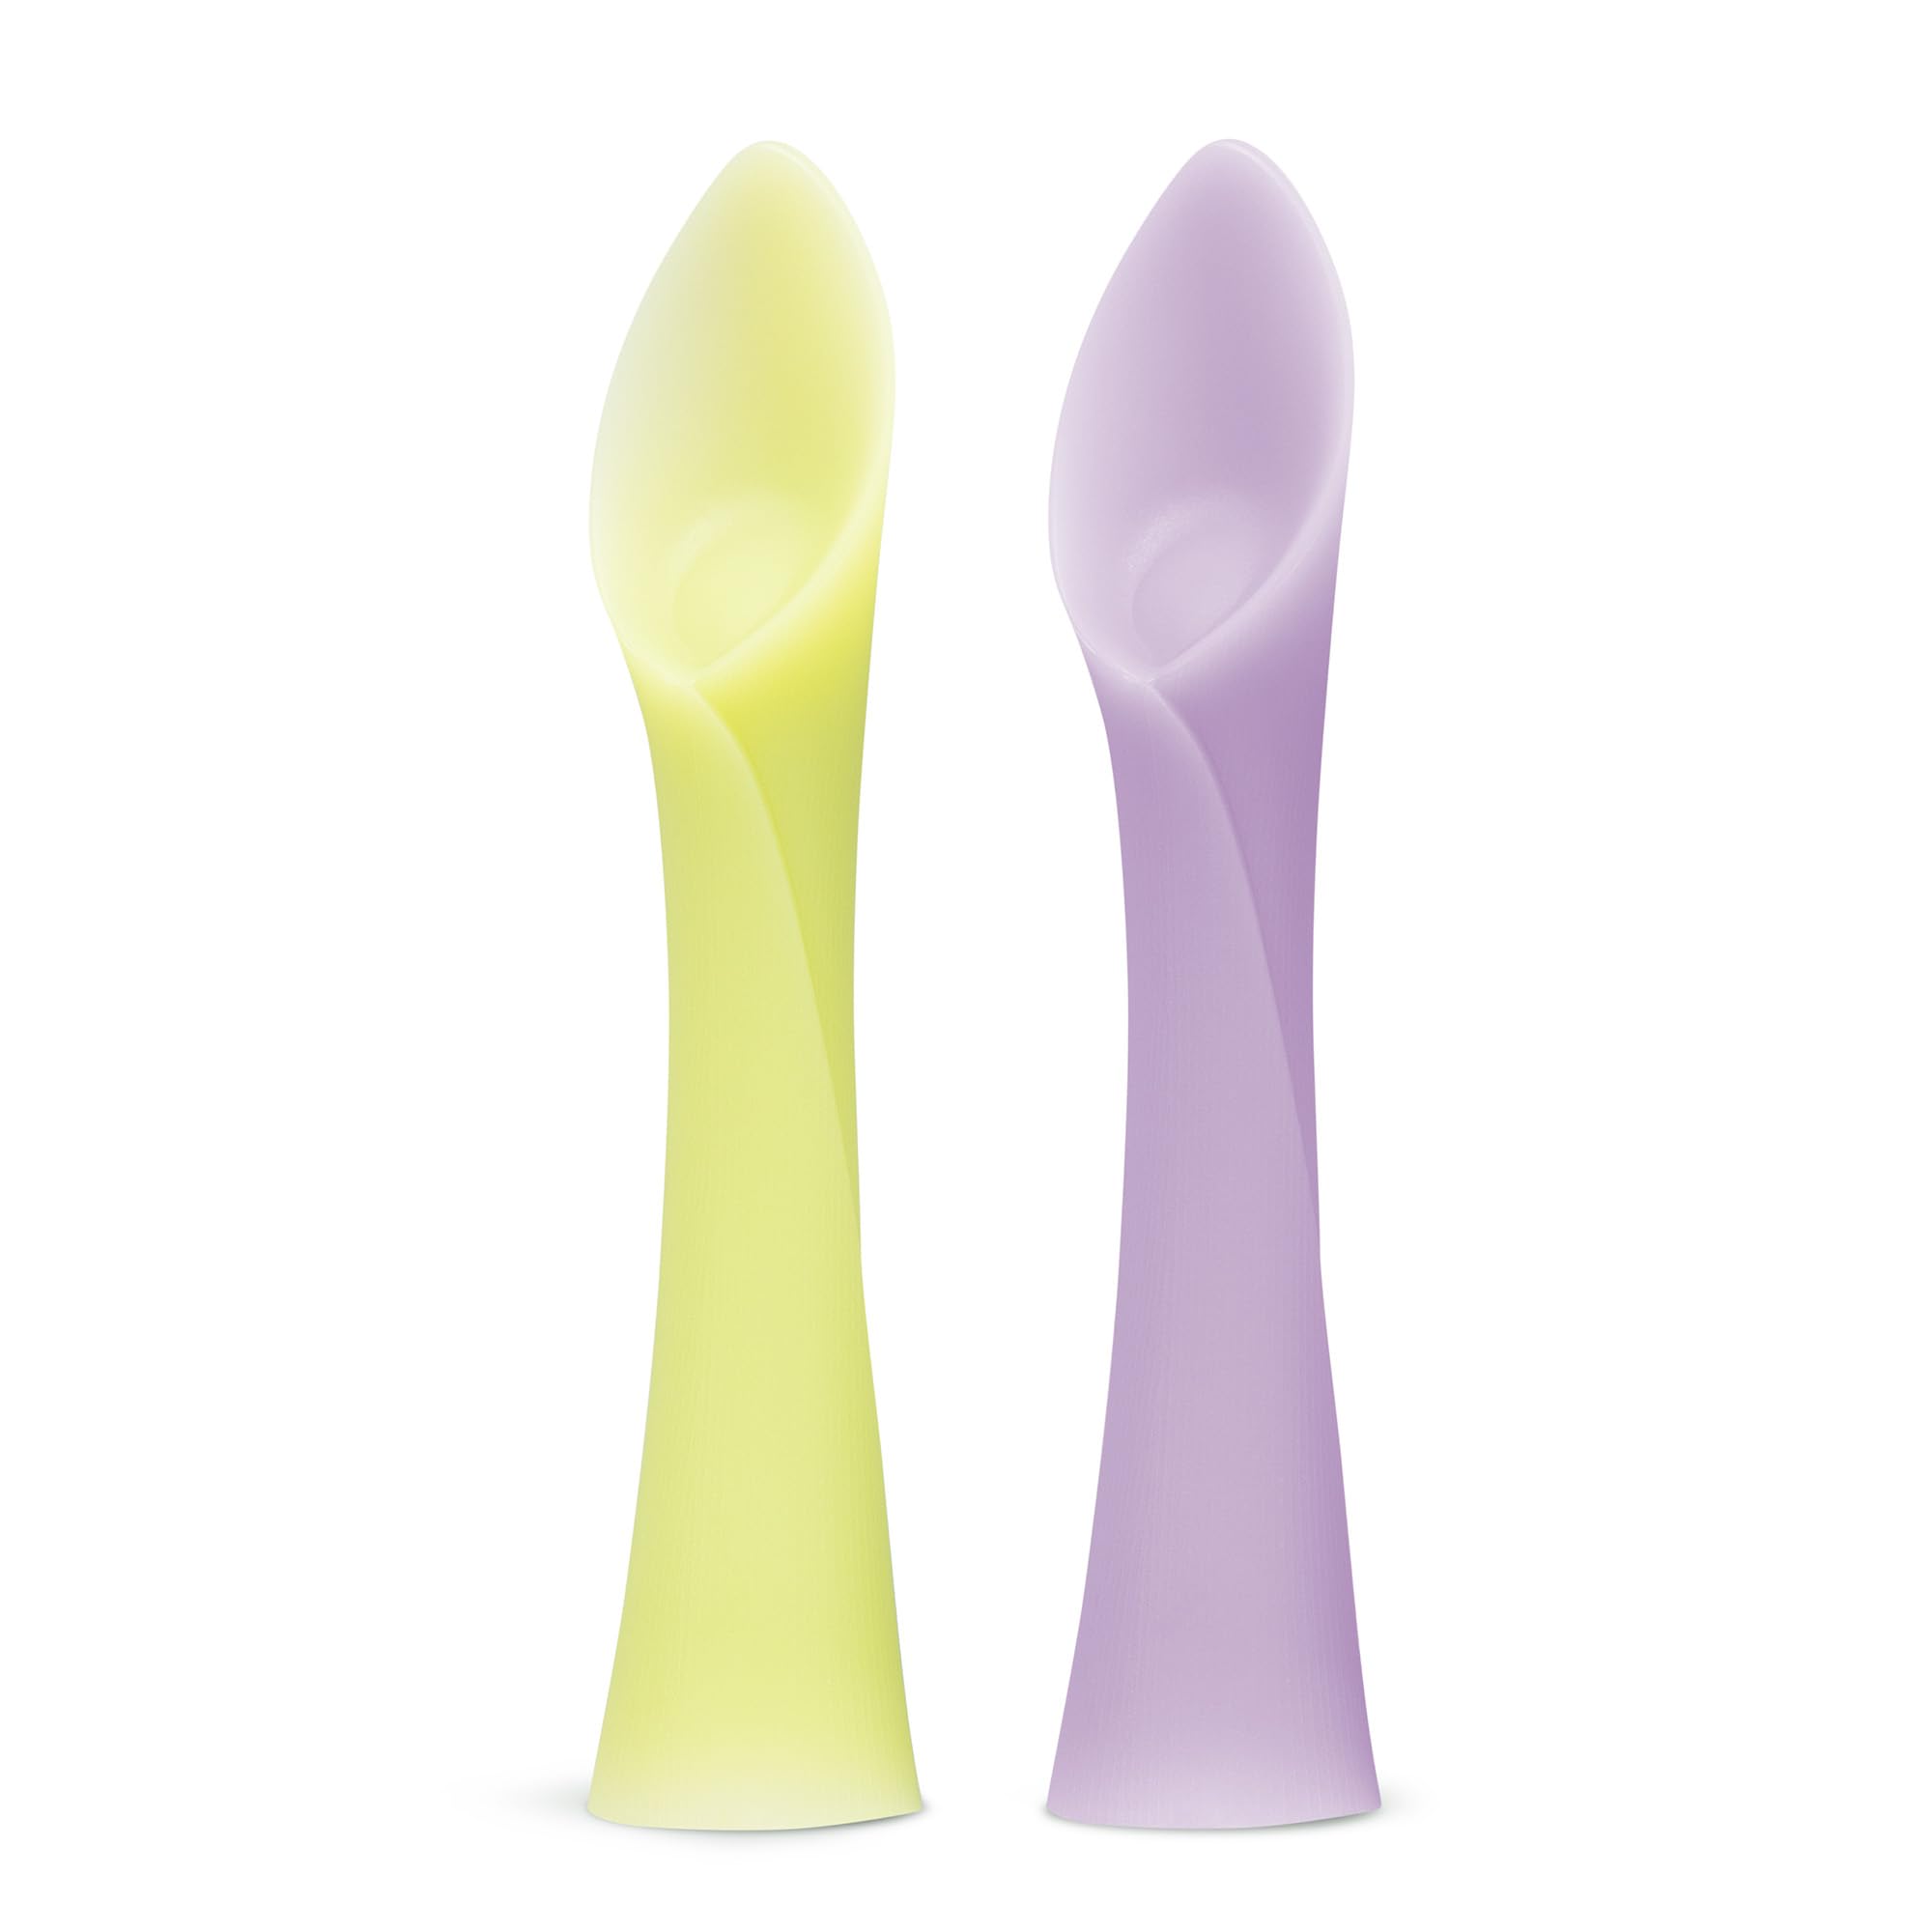 Olababy 100% Silicone Soft-Tip Training Spoon for Baby Led Weaning 2pack (Lemon/Lilac)